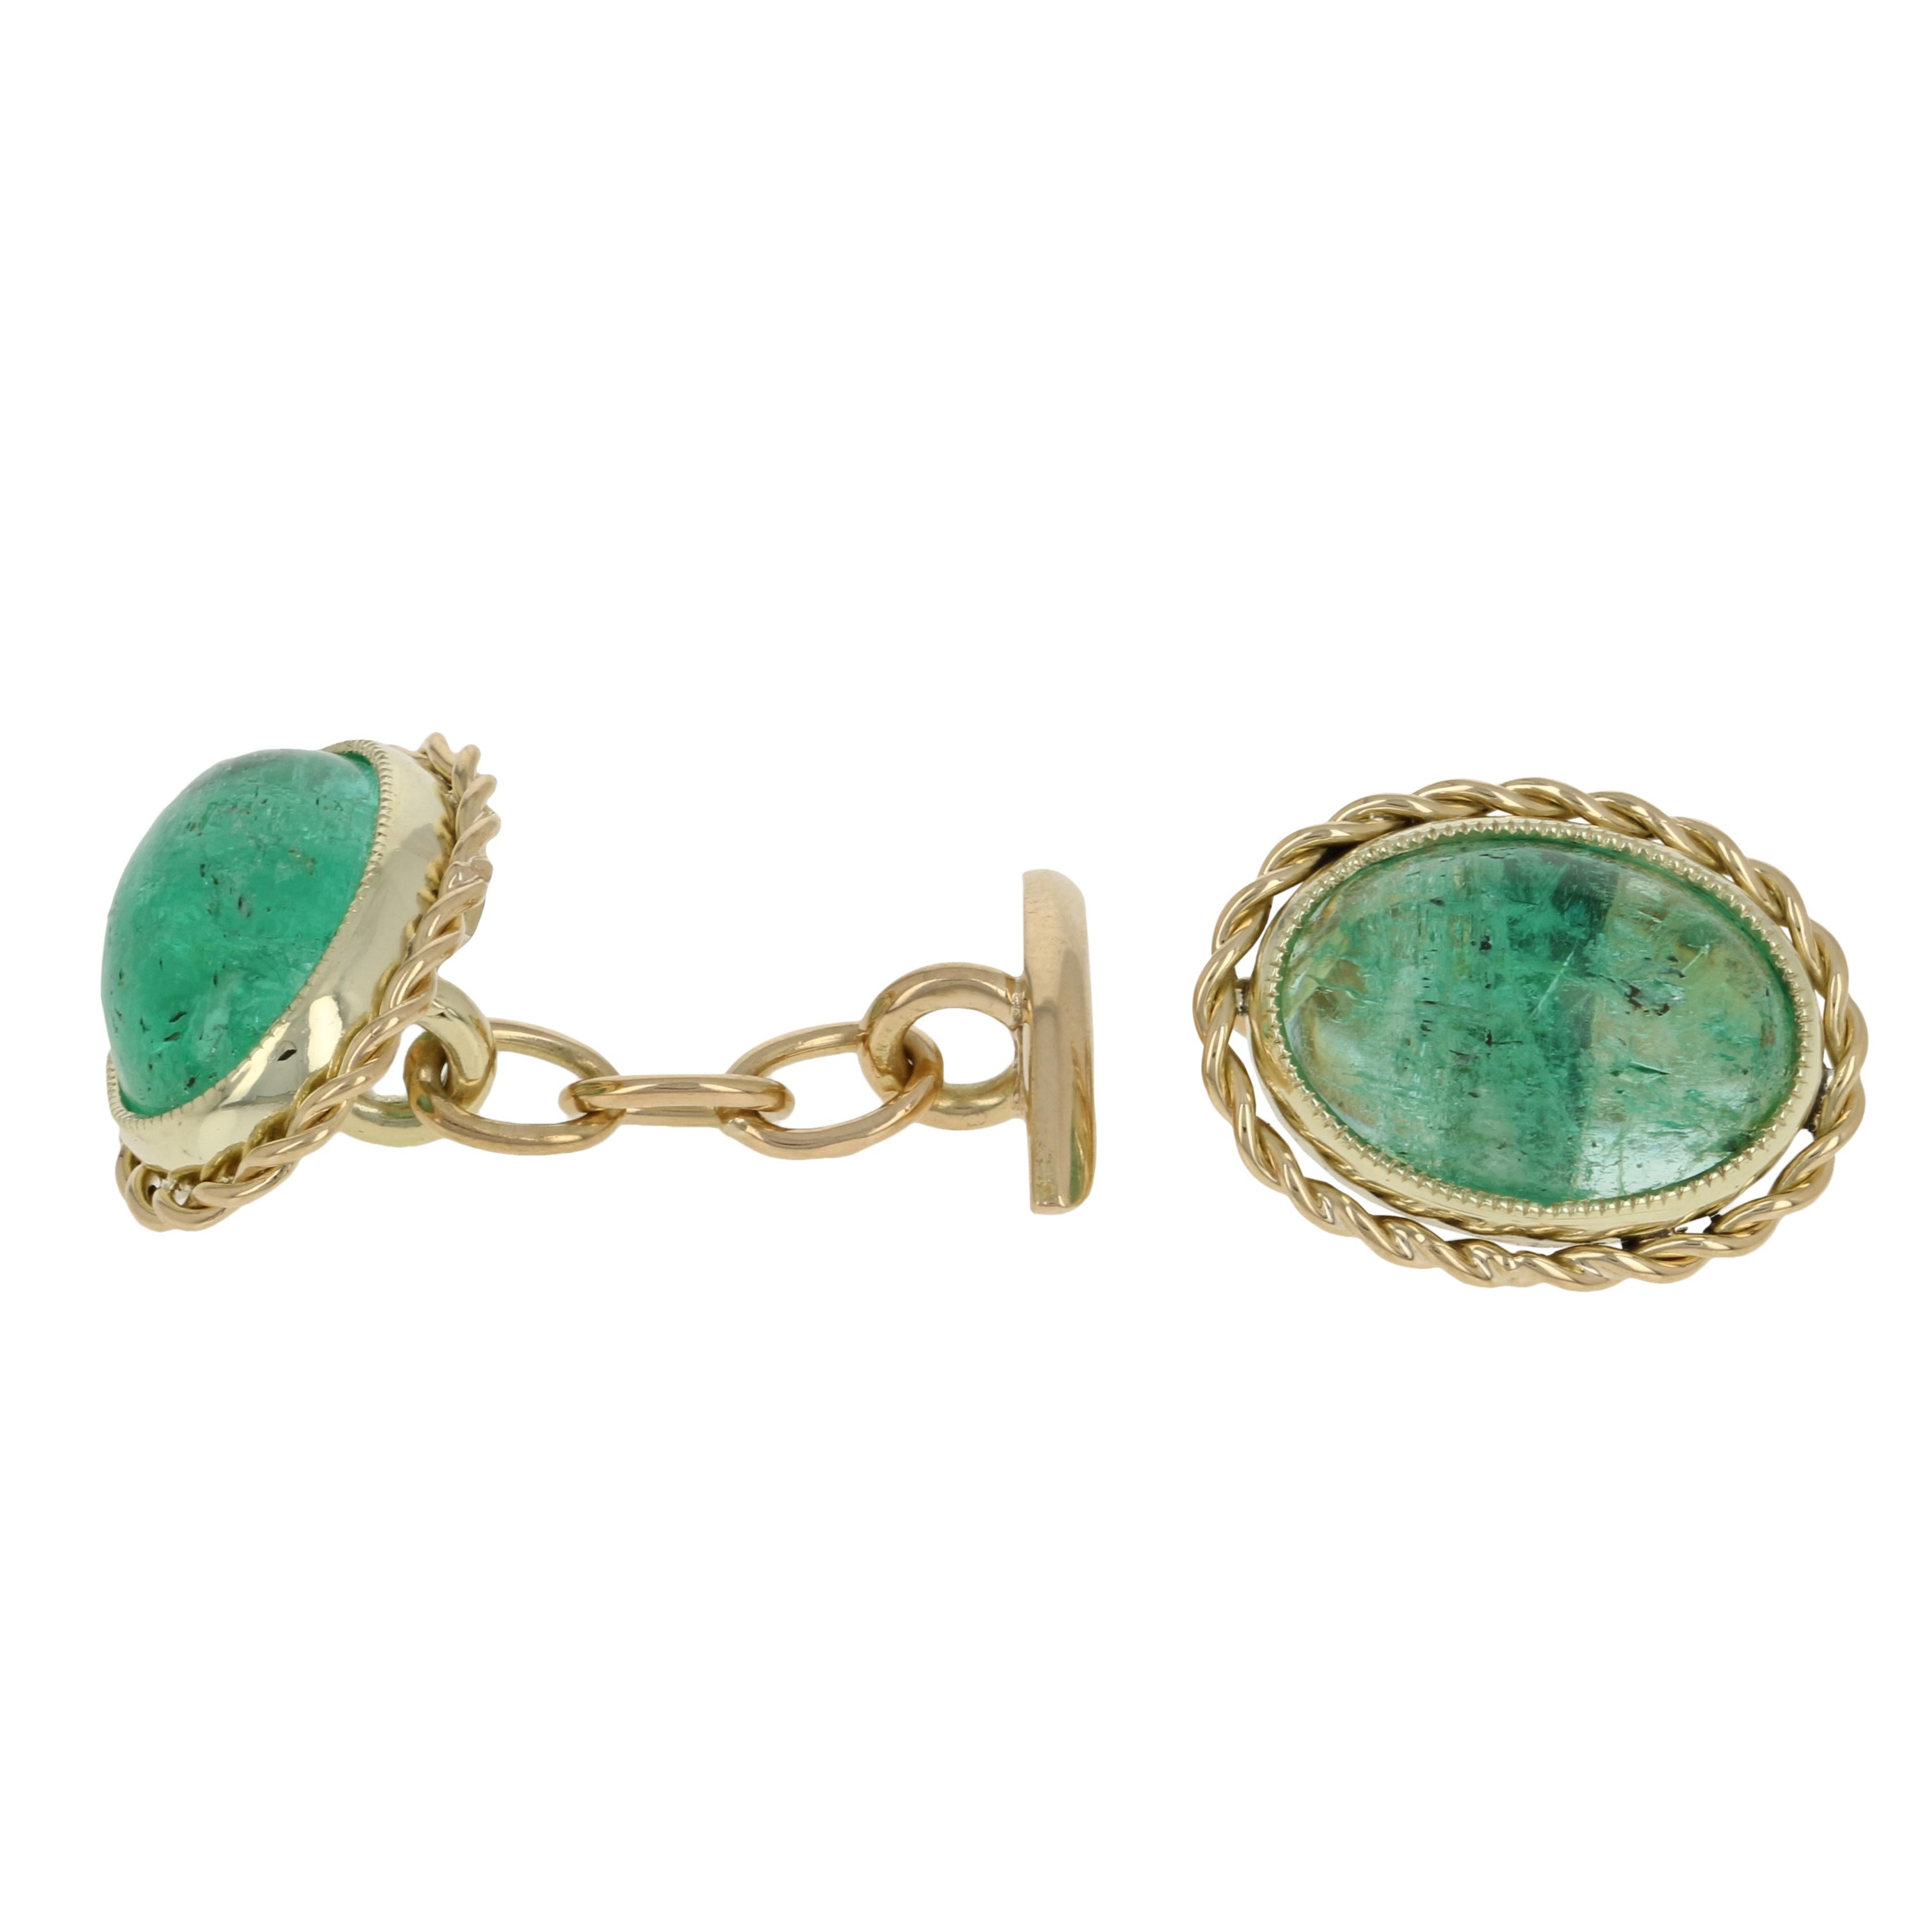 Add a pop of color to your formal attire with these cufflinks! Crafted in 18k yellow gold, this handsome pair hosts luminous emerald cabochons framed by glowing rope borders.  

Metal Content: Guaranteed 18k Gold as stamped

Stone